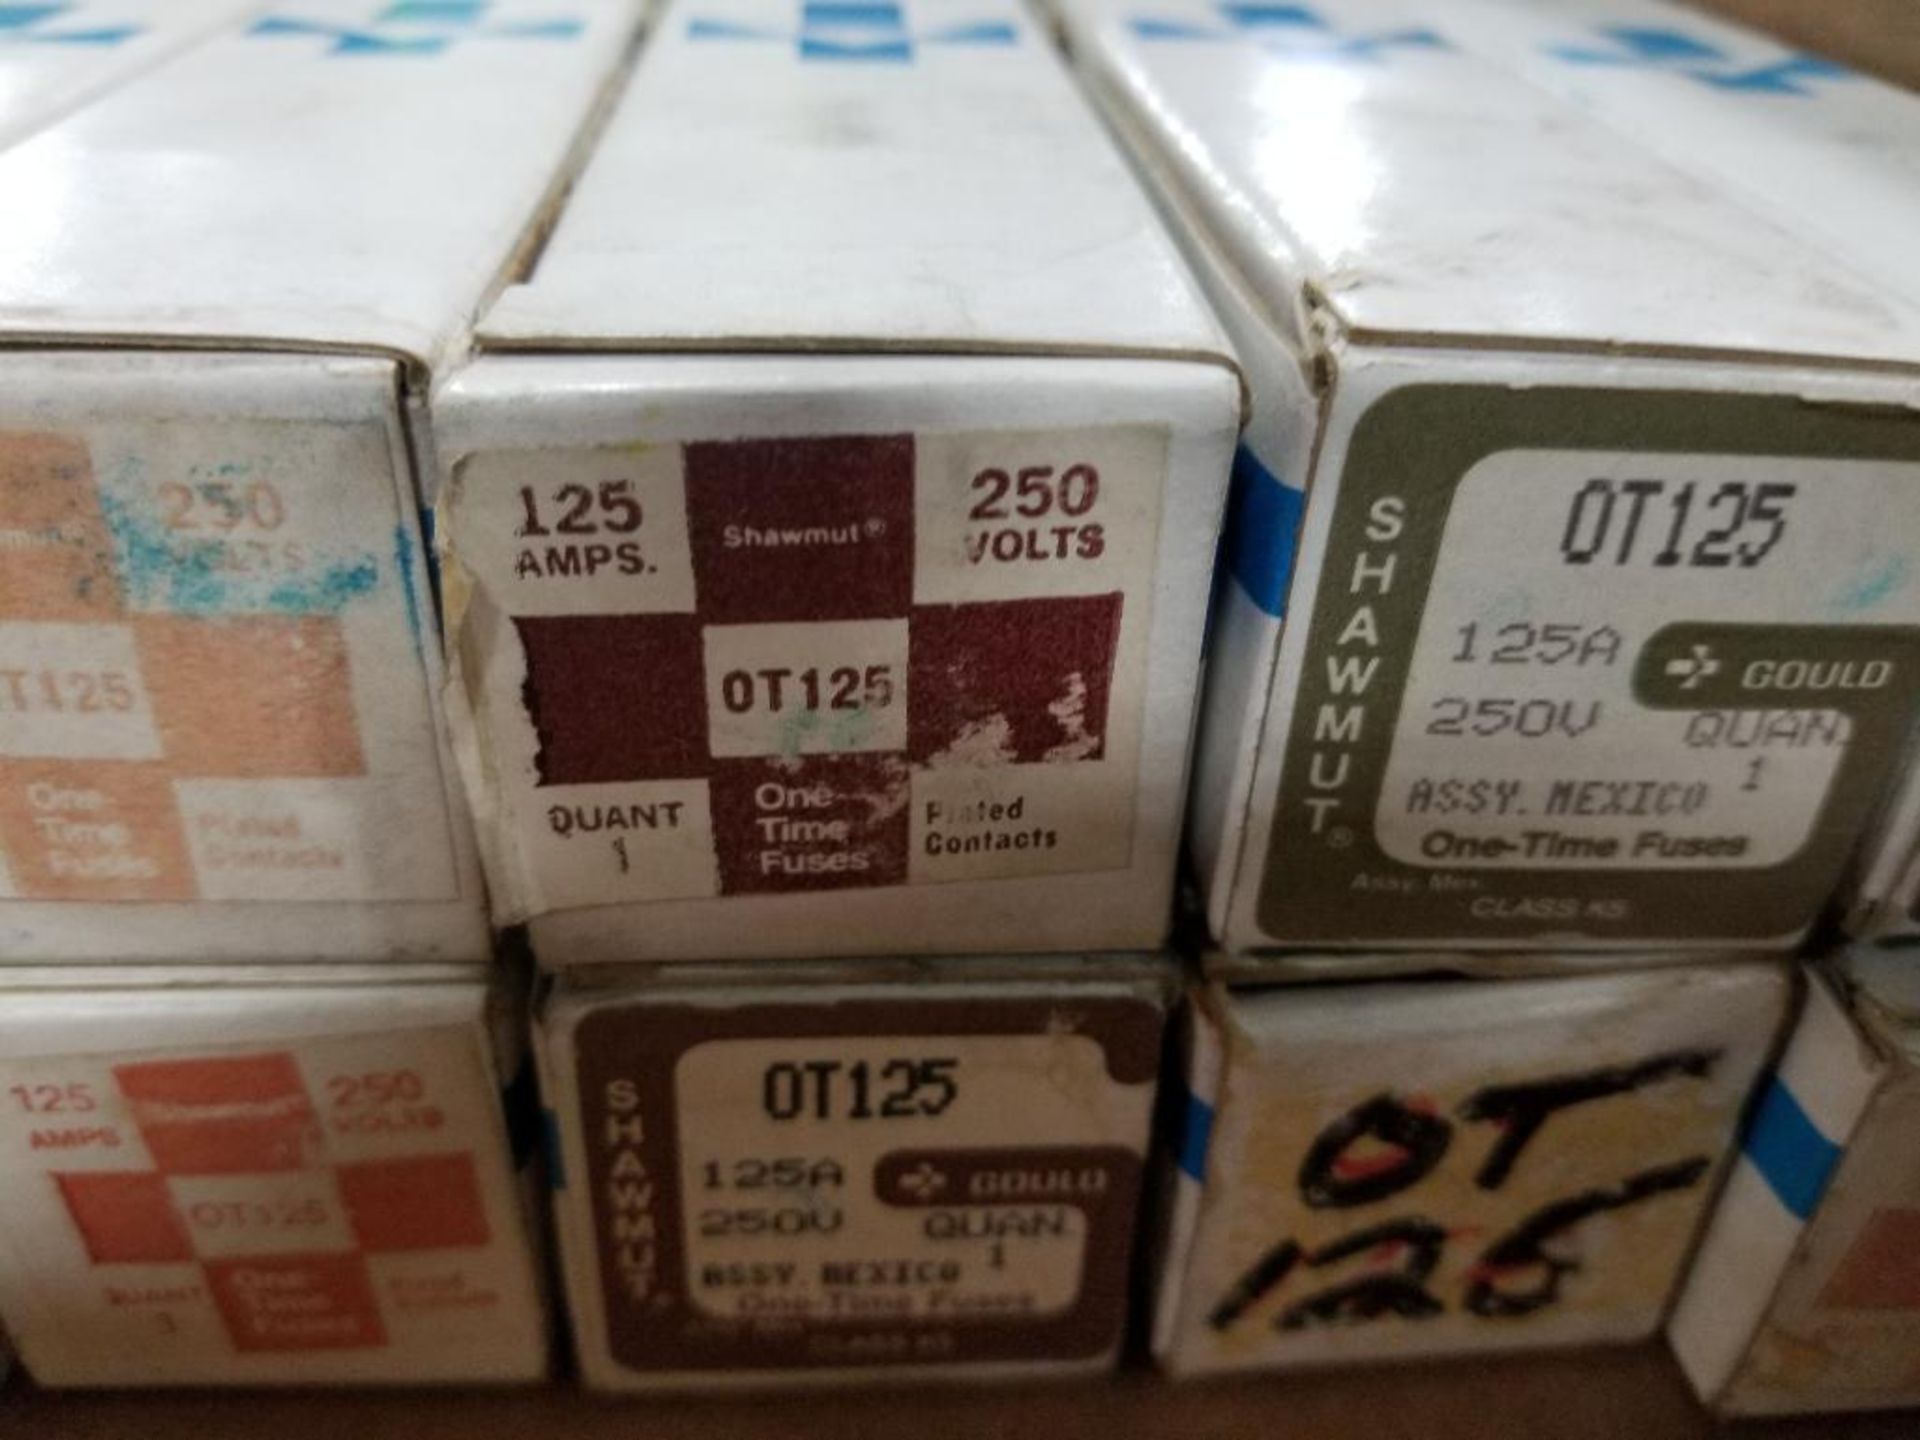 Qty 14 - Gould Shawmut fuses. Part number OT125. New in box. - Image 2 of 3